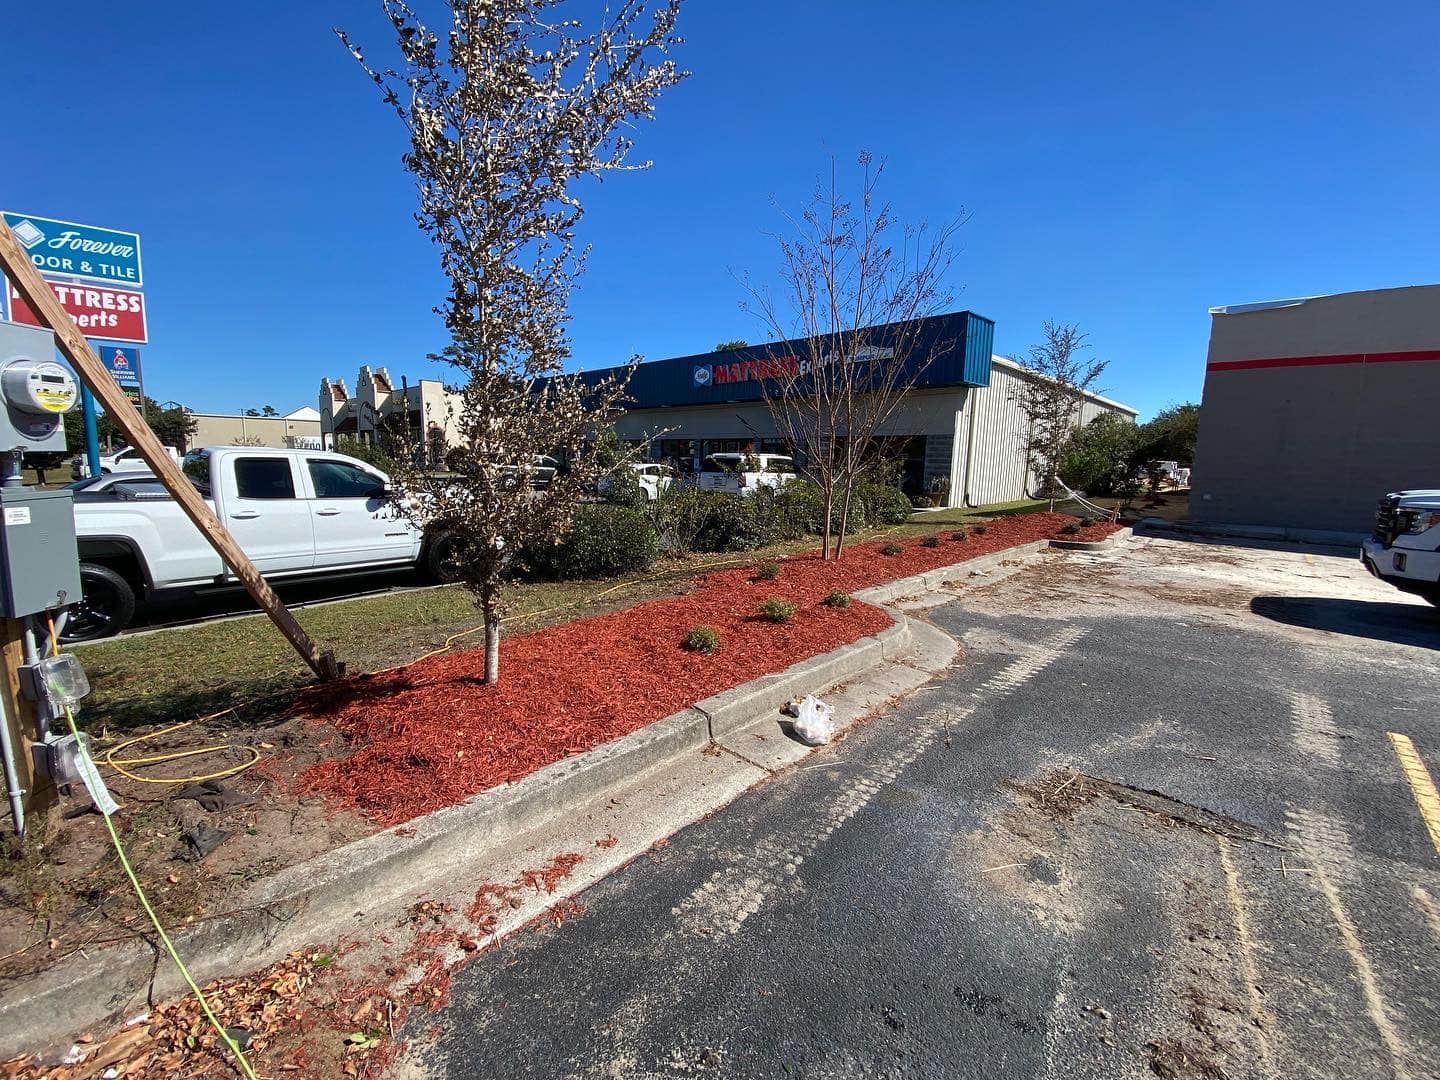 Installed 100 trees and 70 shrubs in North Myrtle Beach, SC 29582